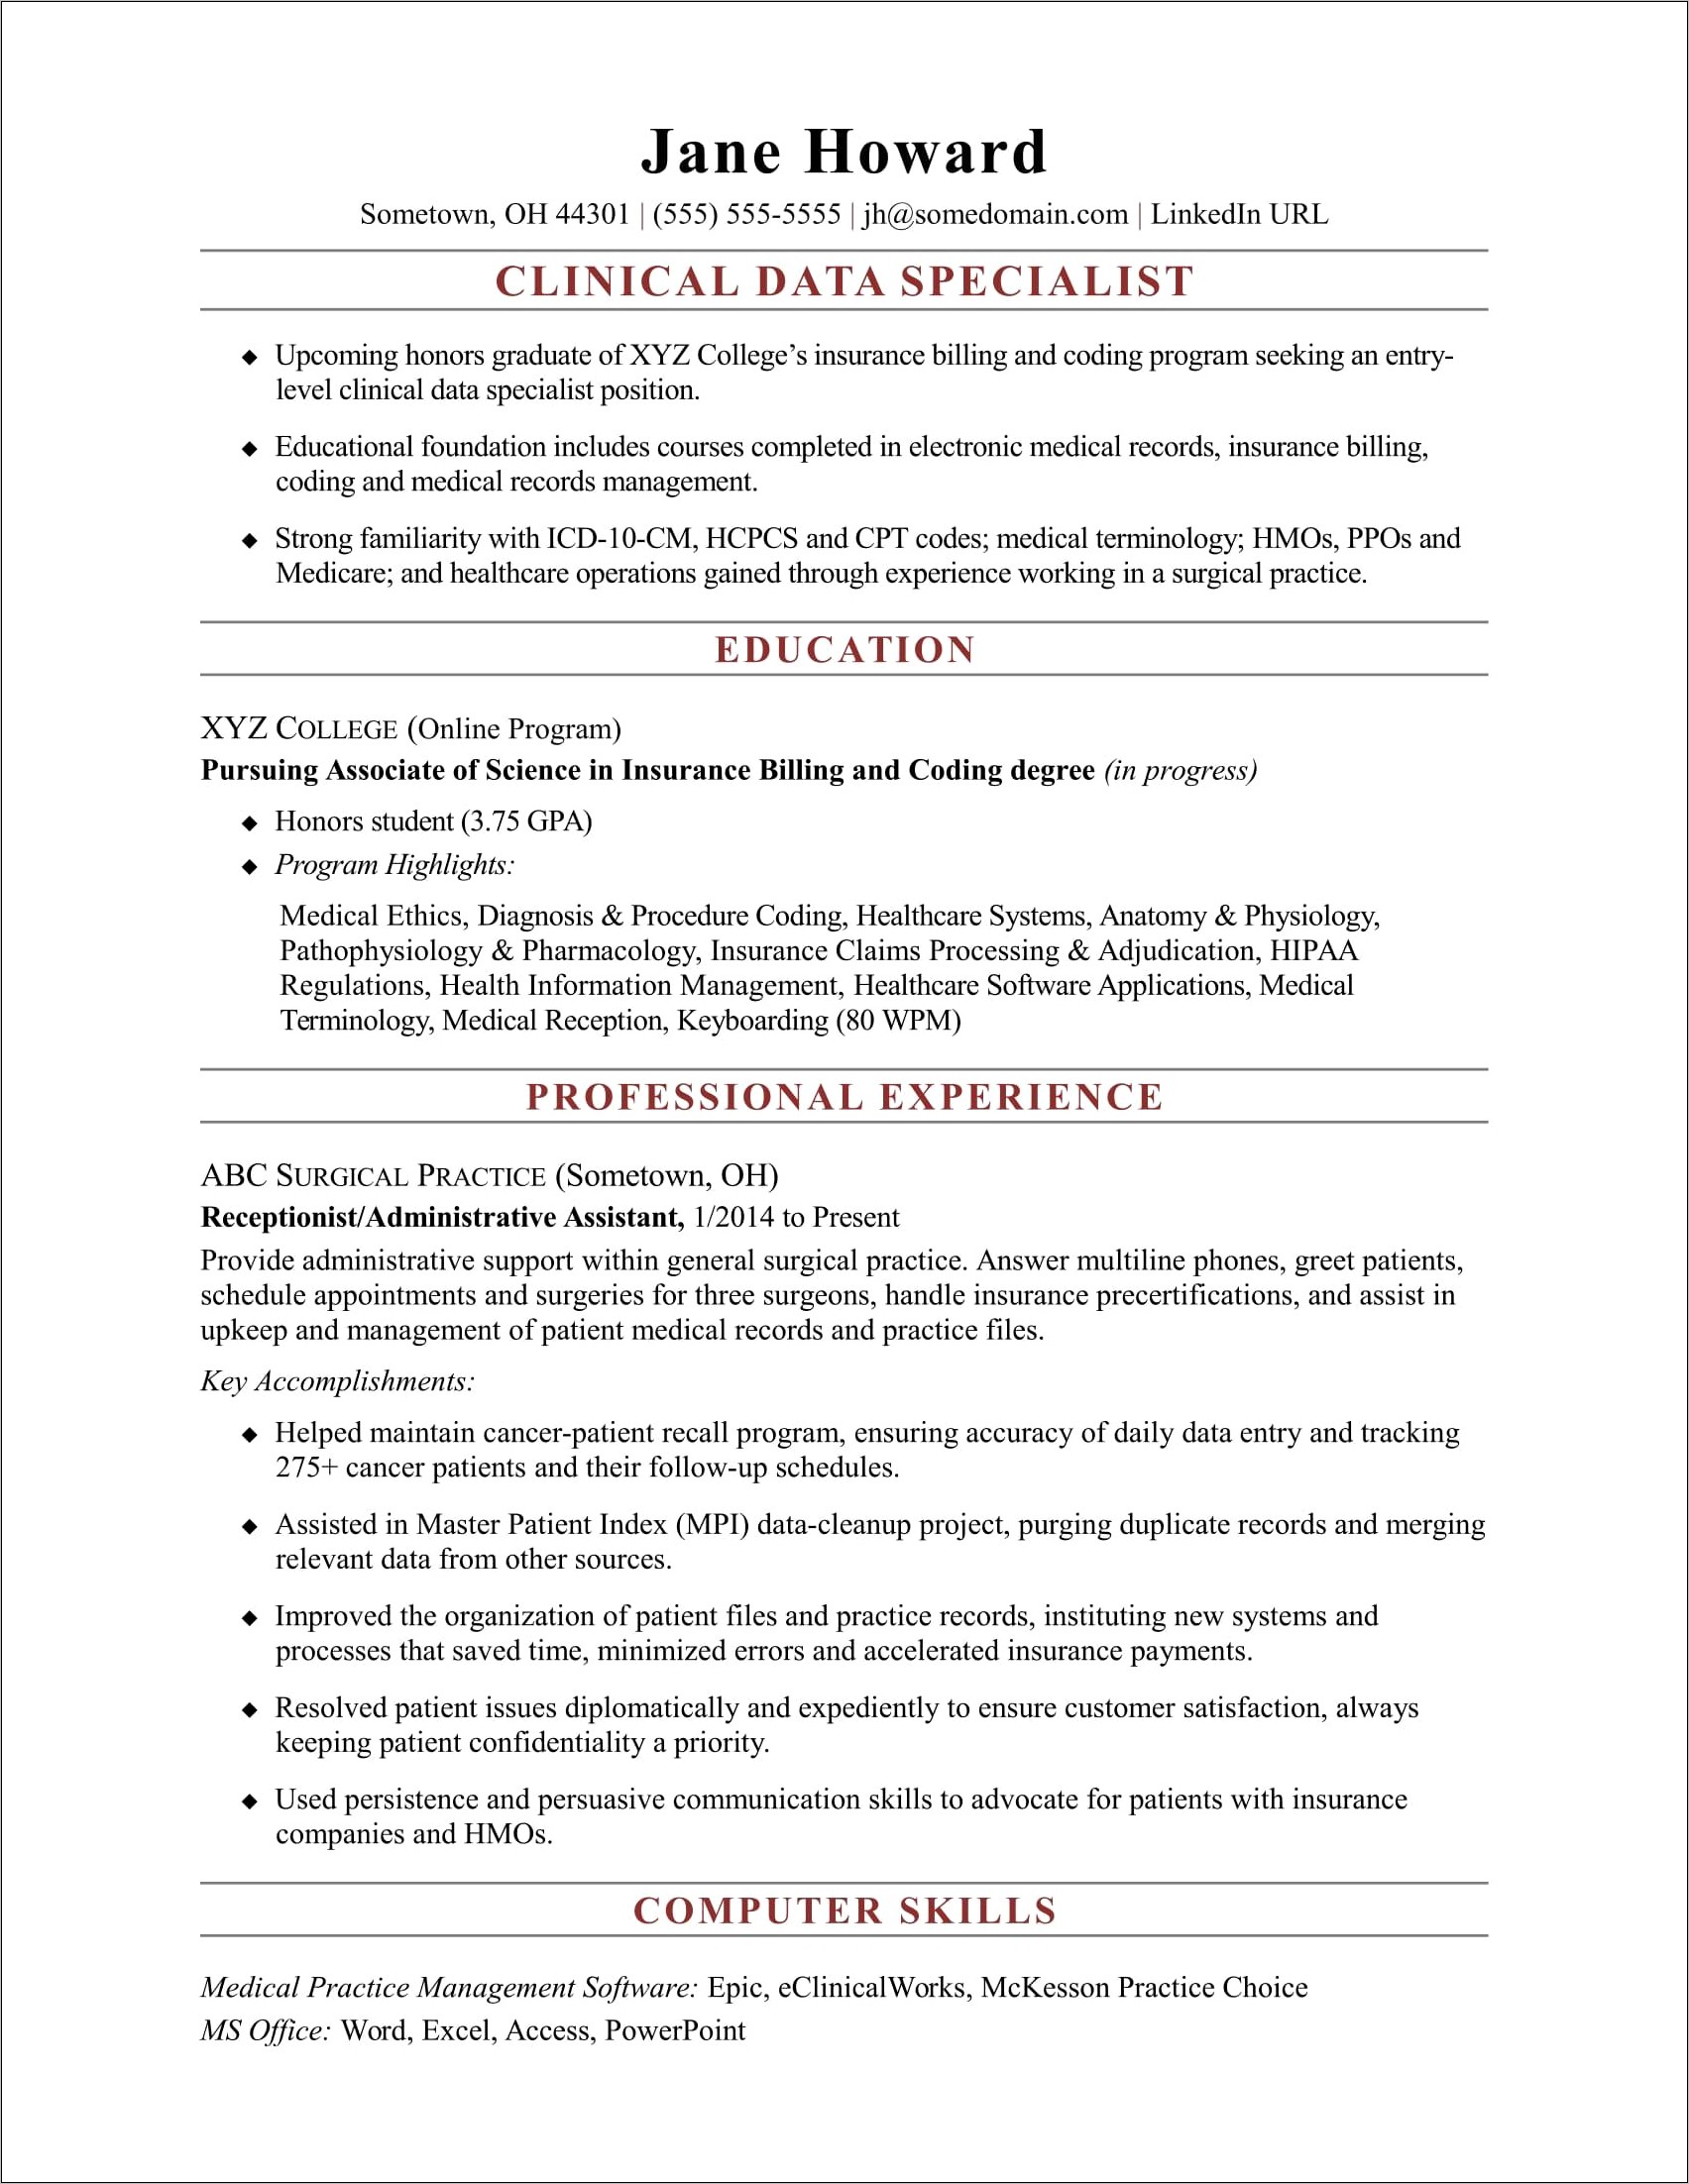 Practice Completing A Job Resume